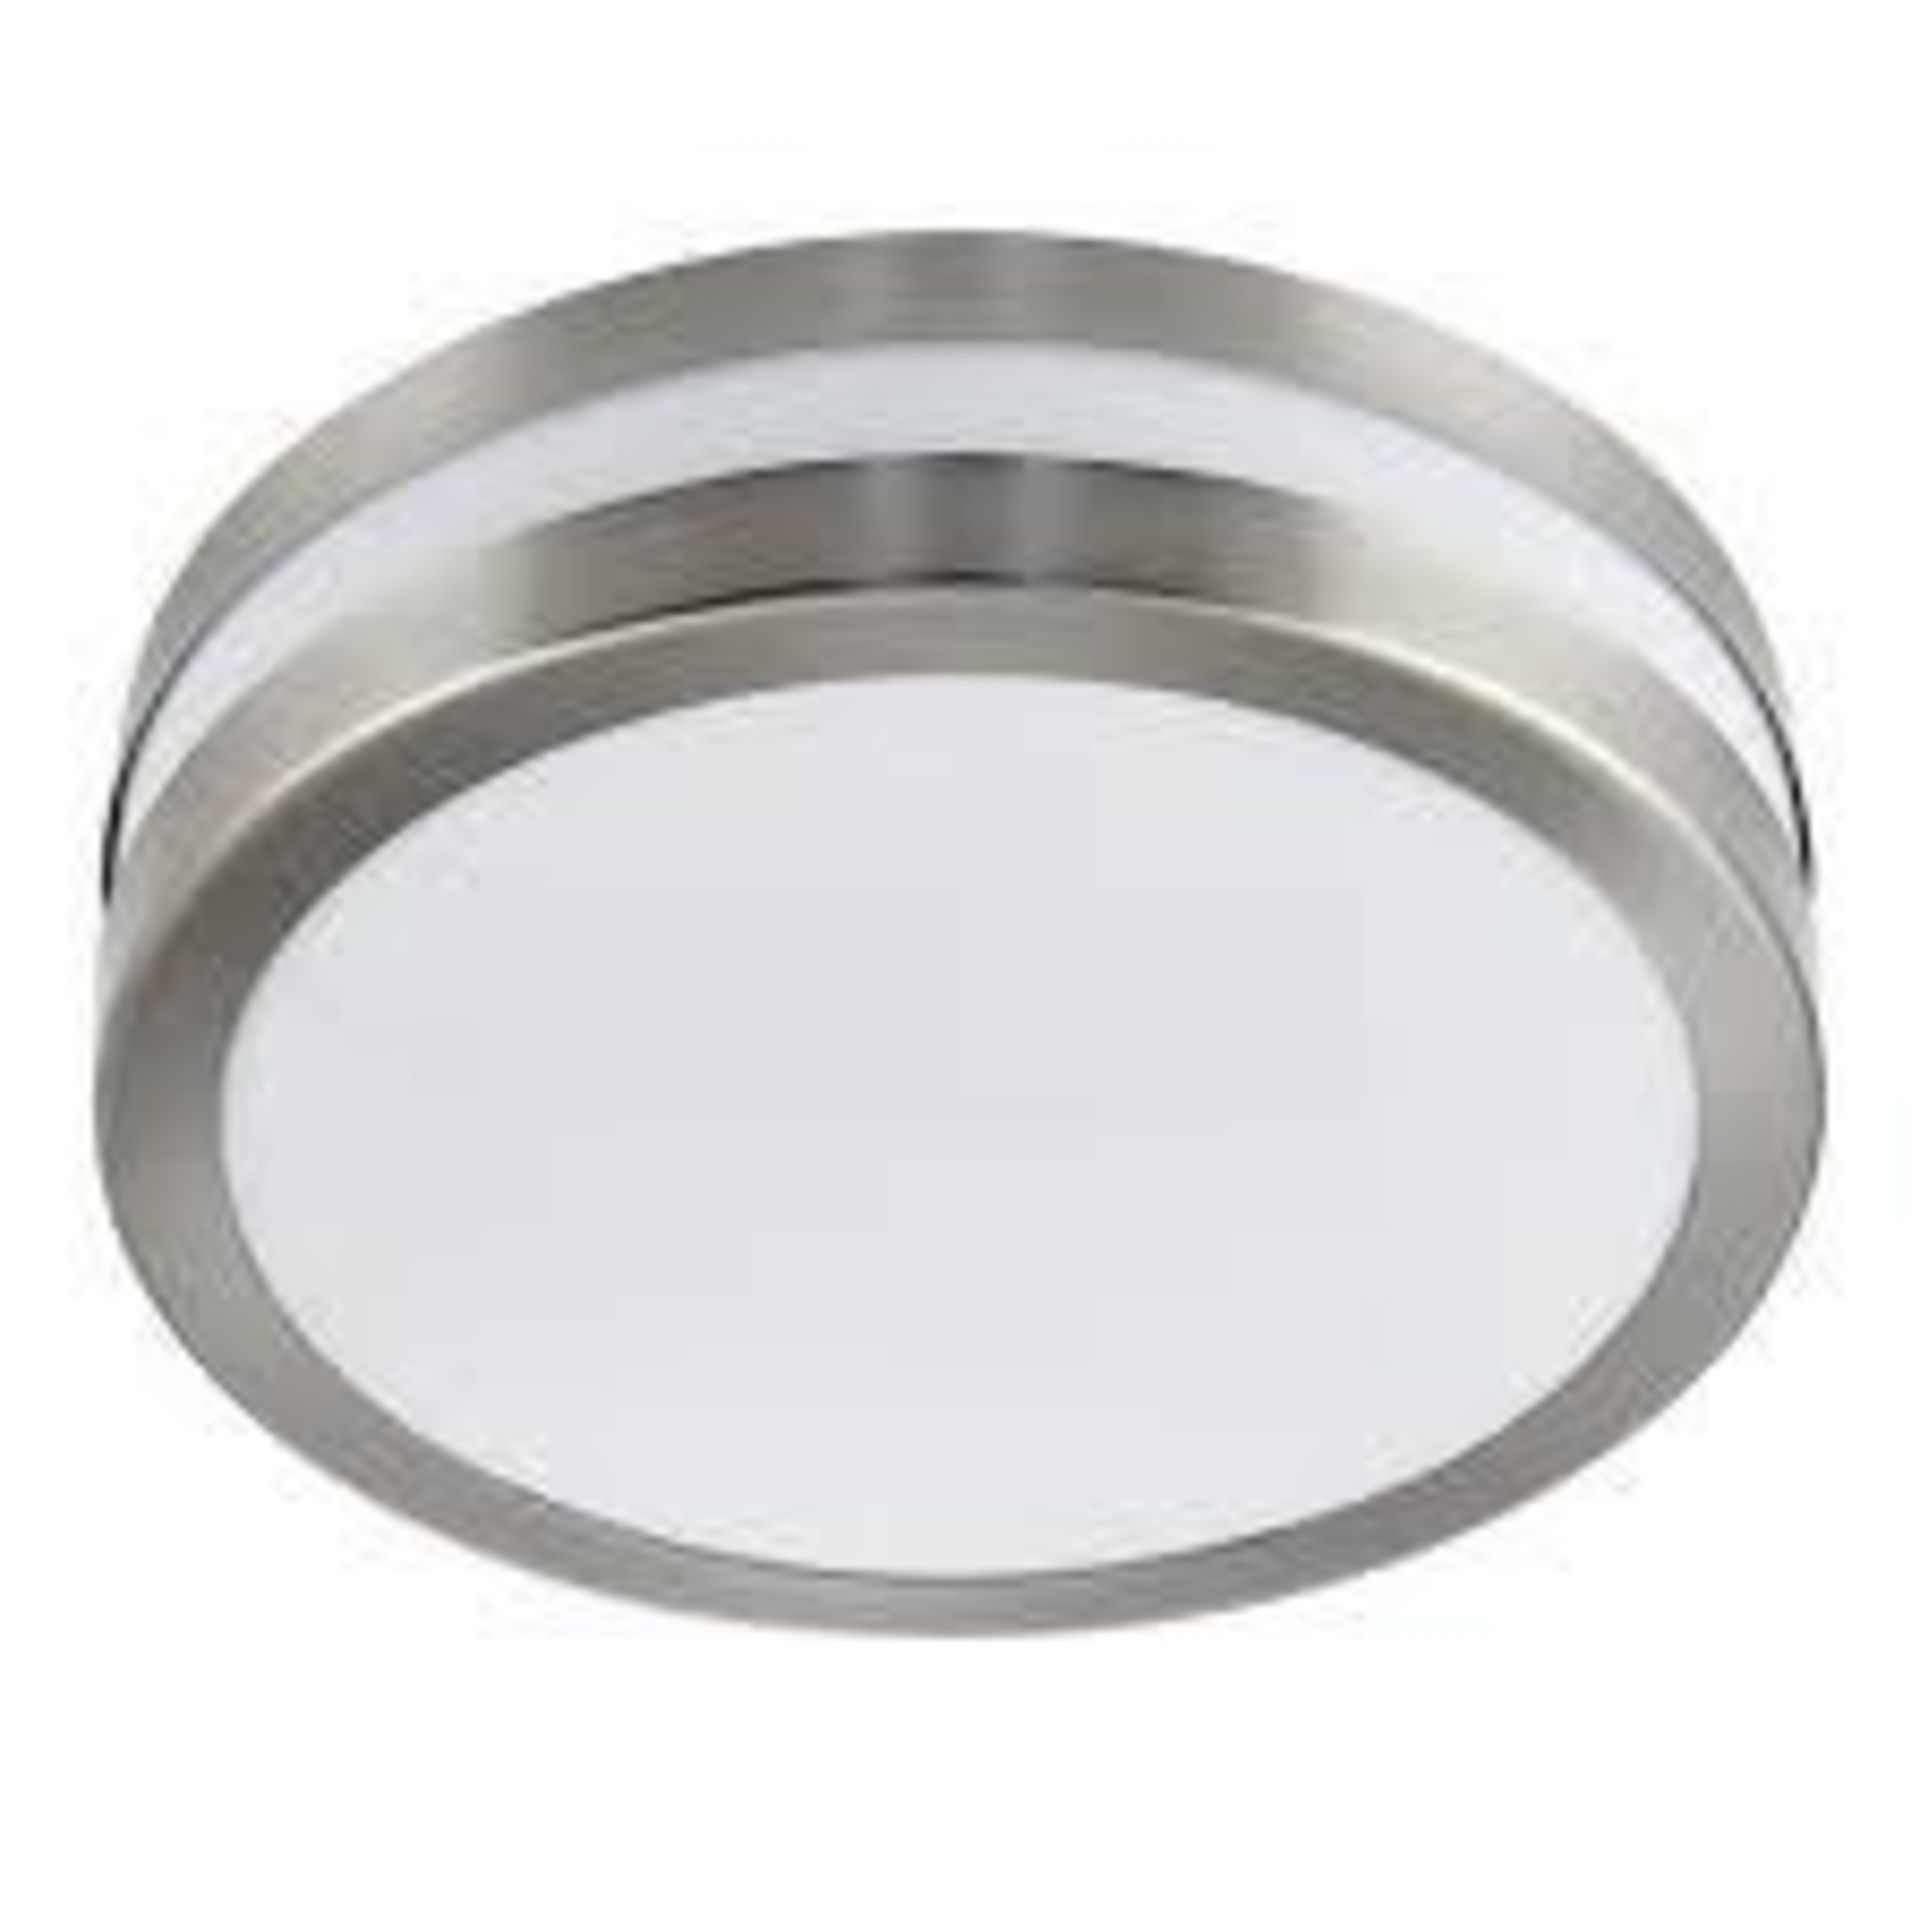 1 x Searchlight Circular Bathroom Flush satin silver finish- Ref: 2641-28 - New And Boxed Stock - AA - Image 2 of 3